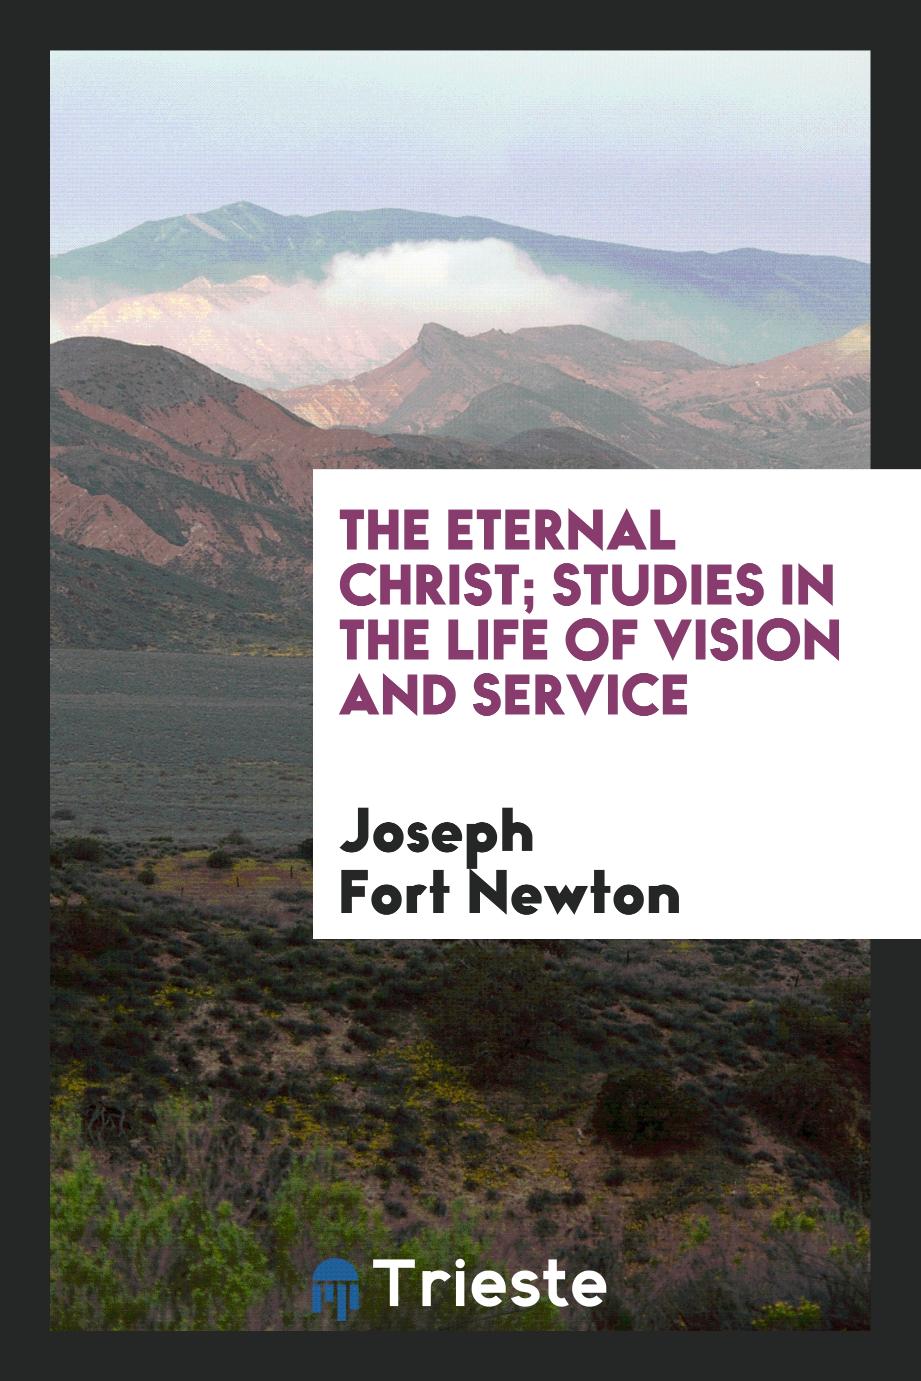 The eternal Christ; studies in the life of vision and service